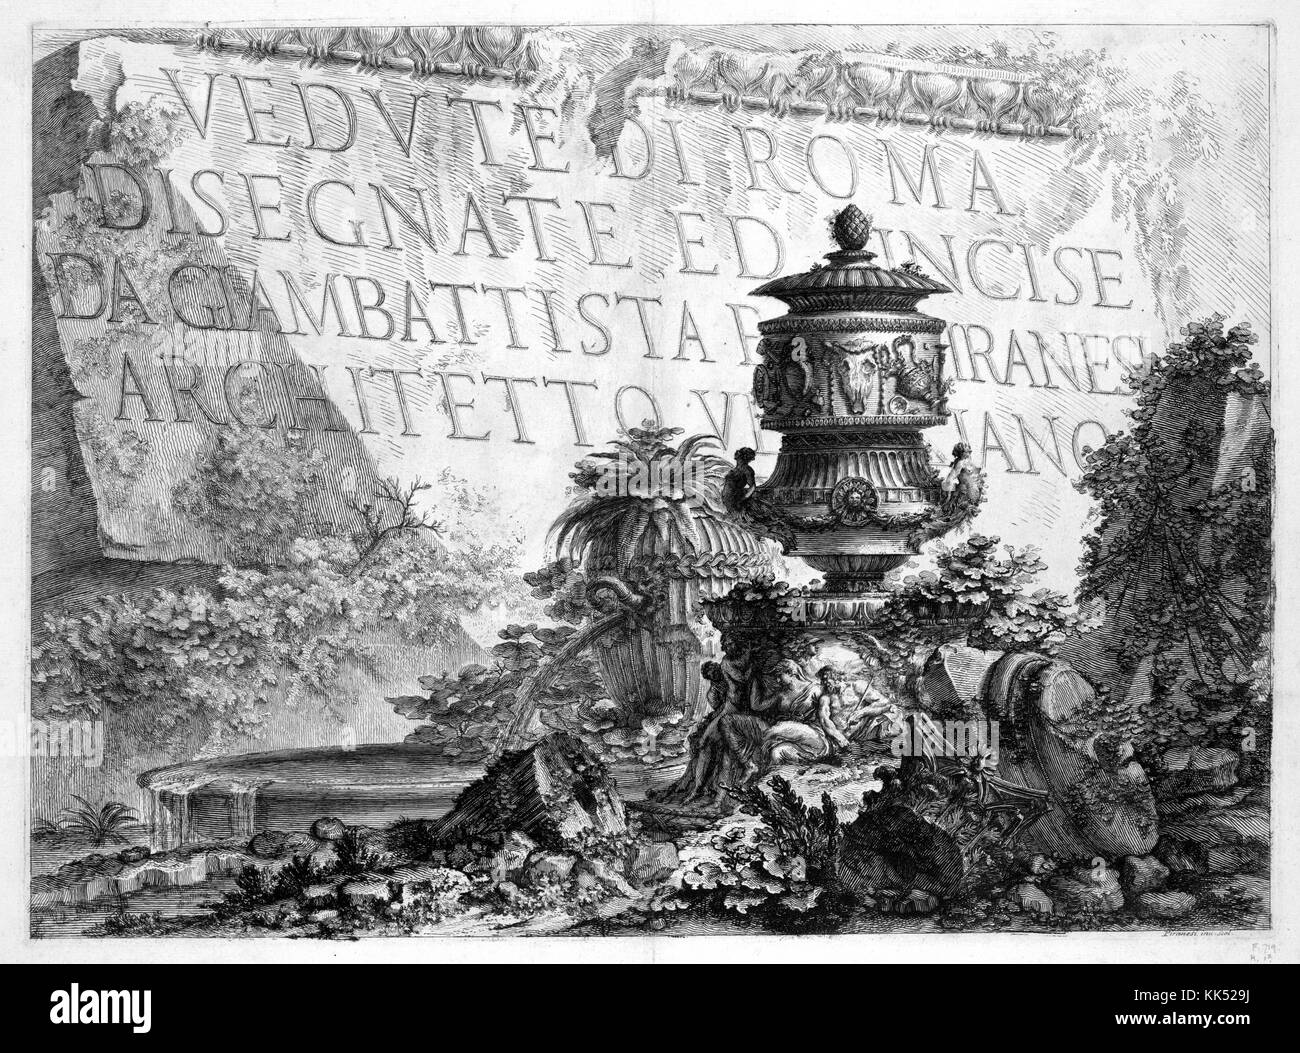 The engraving that created the title page for the book Verdute di Roma or Views of Rome, the title page features the name of the collection of engravings done by Giovanni Battista Piranesi, the background is made to resemble a carving that would appear on an ancient Roman ruin, the foreground features ruins and rubble being over taken by plants, Italy, 1749. From the New York Public Library. Stock Photo